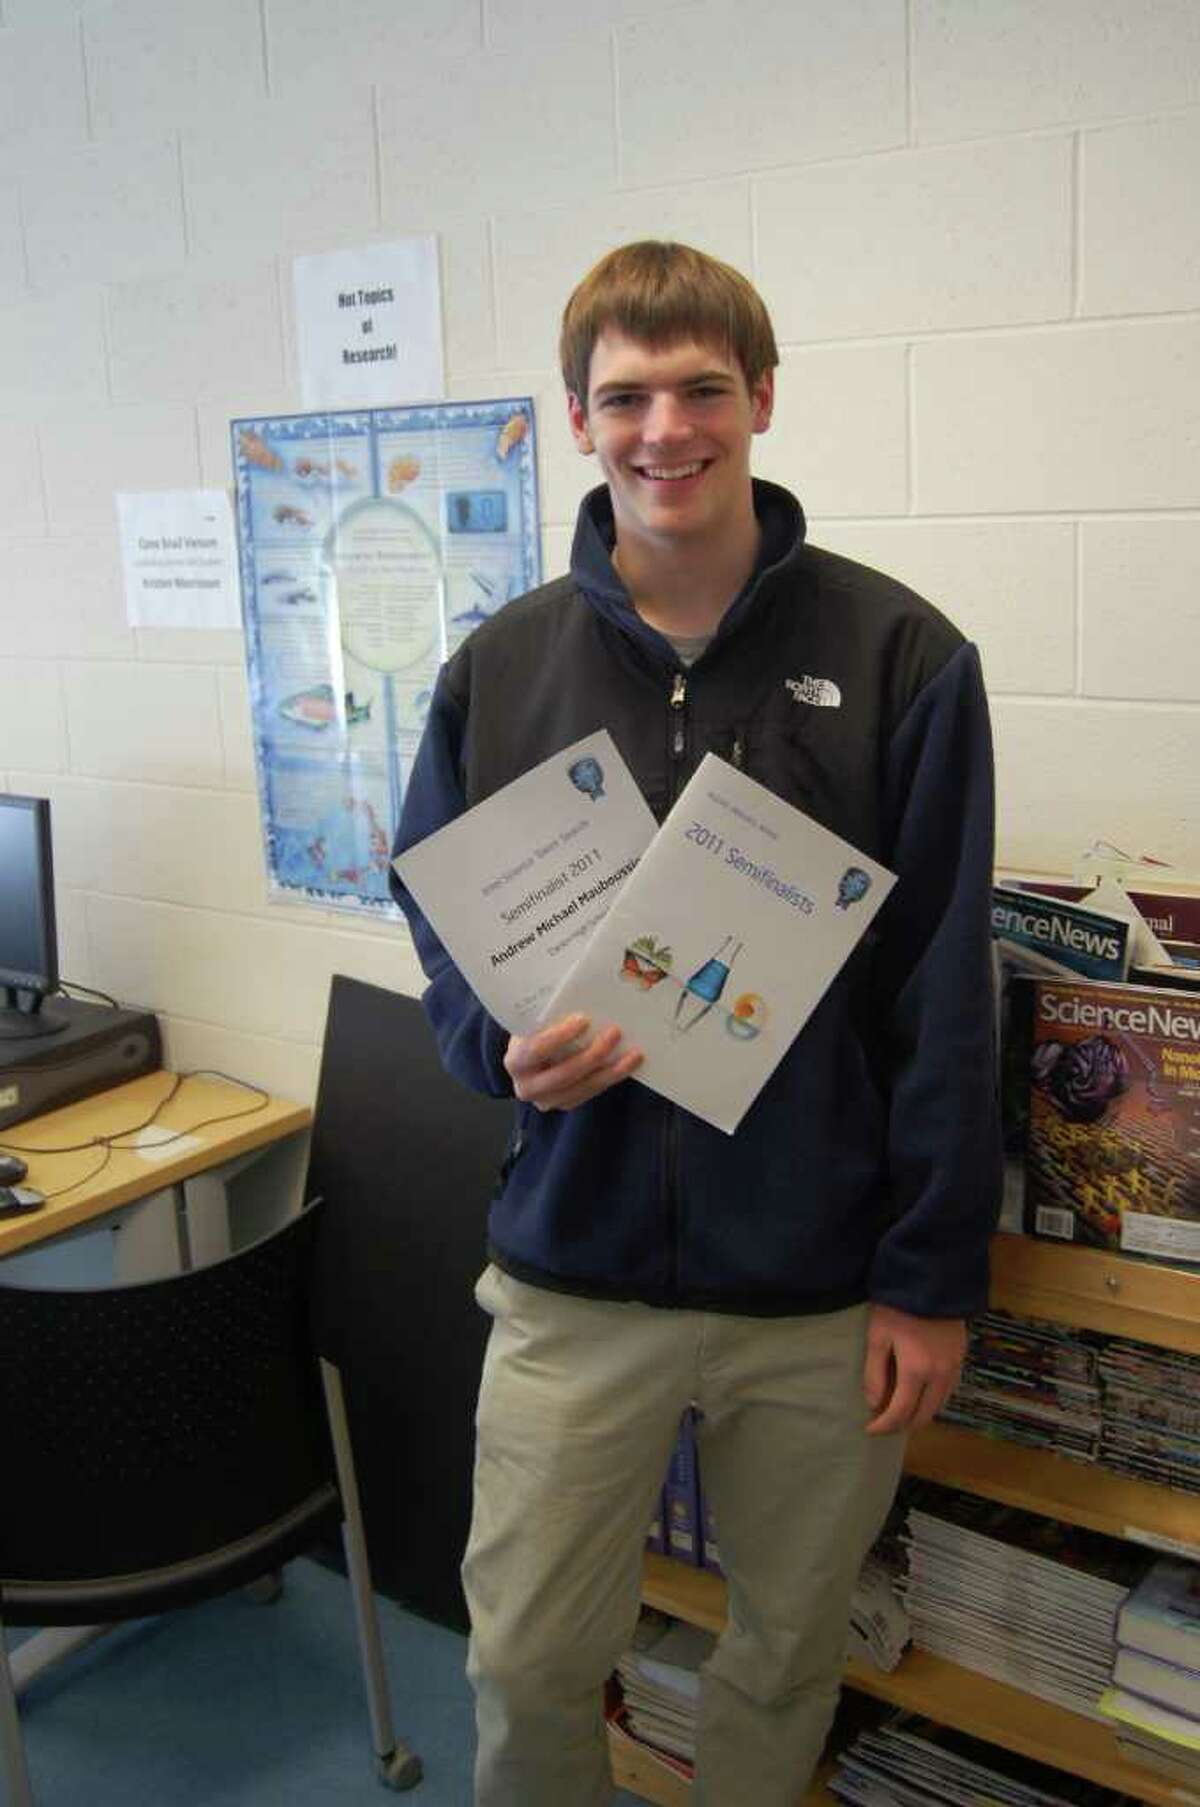 Andrew Mauboussin poses with his award for being a semi-finalist in the Intel Science Talent Search competition.